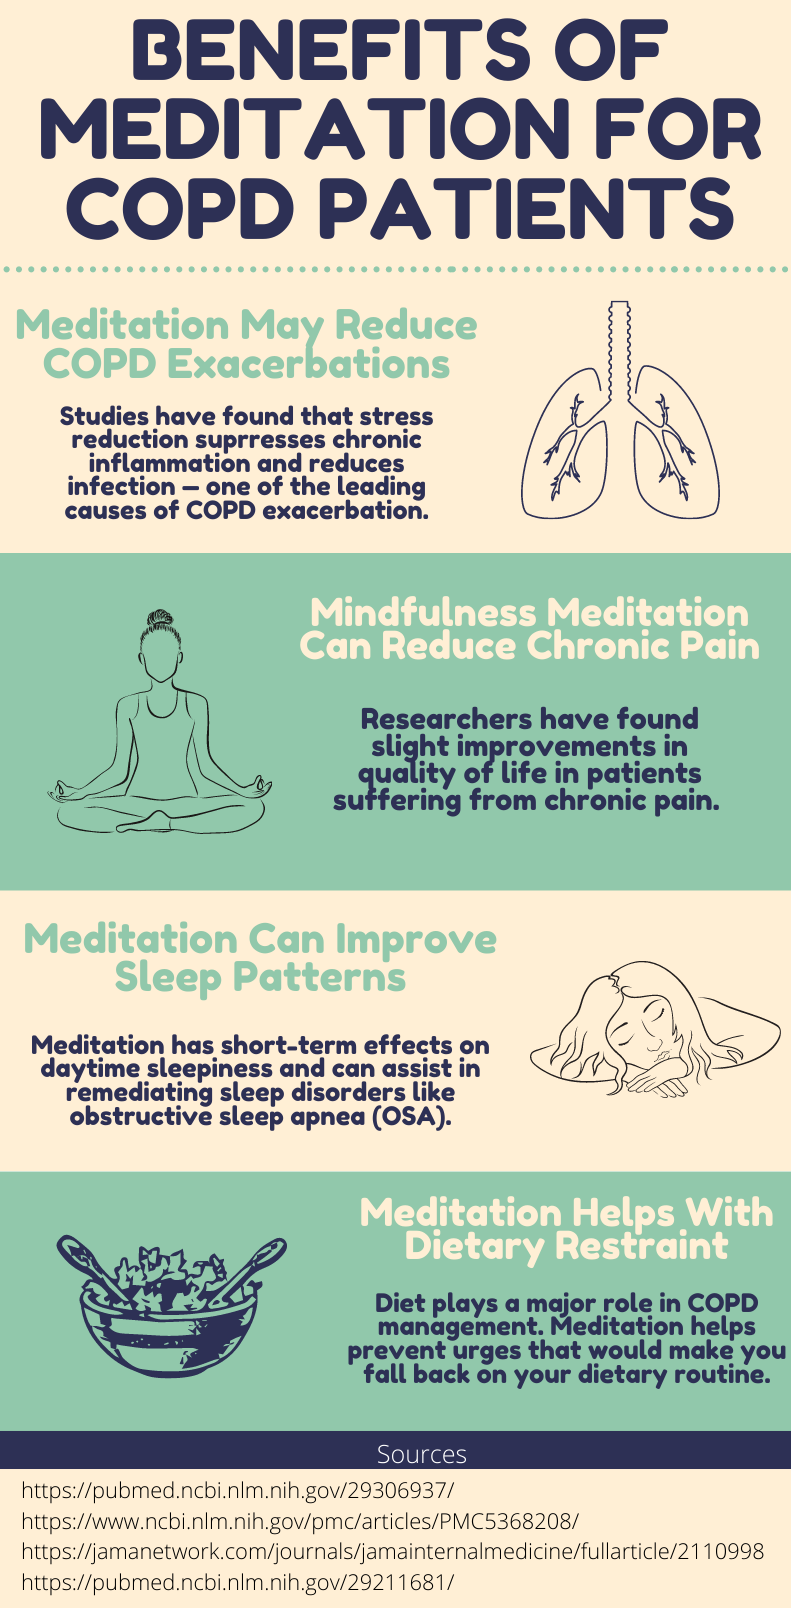 Benefits of meditation for copd patients